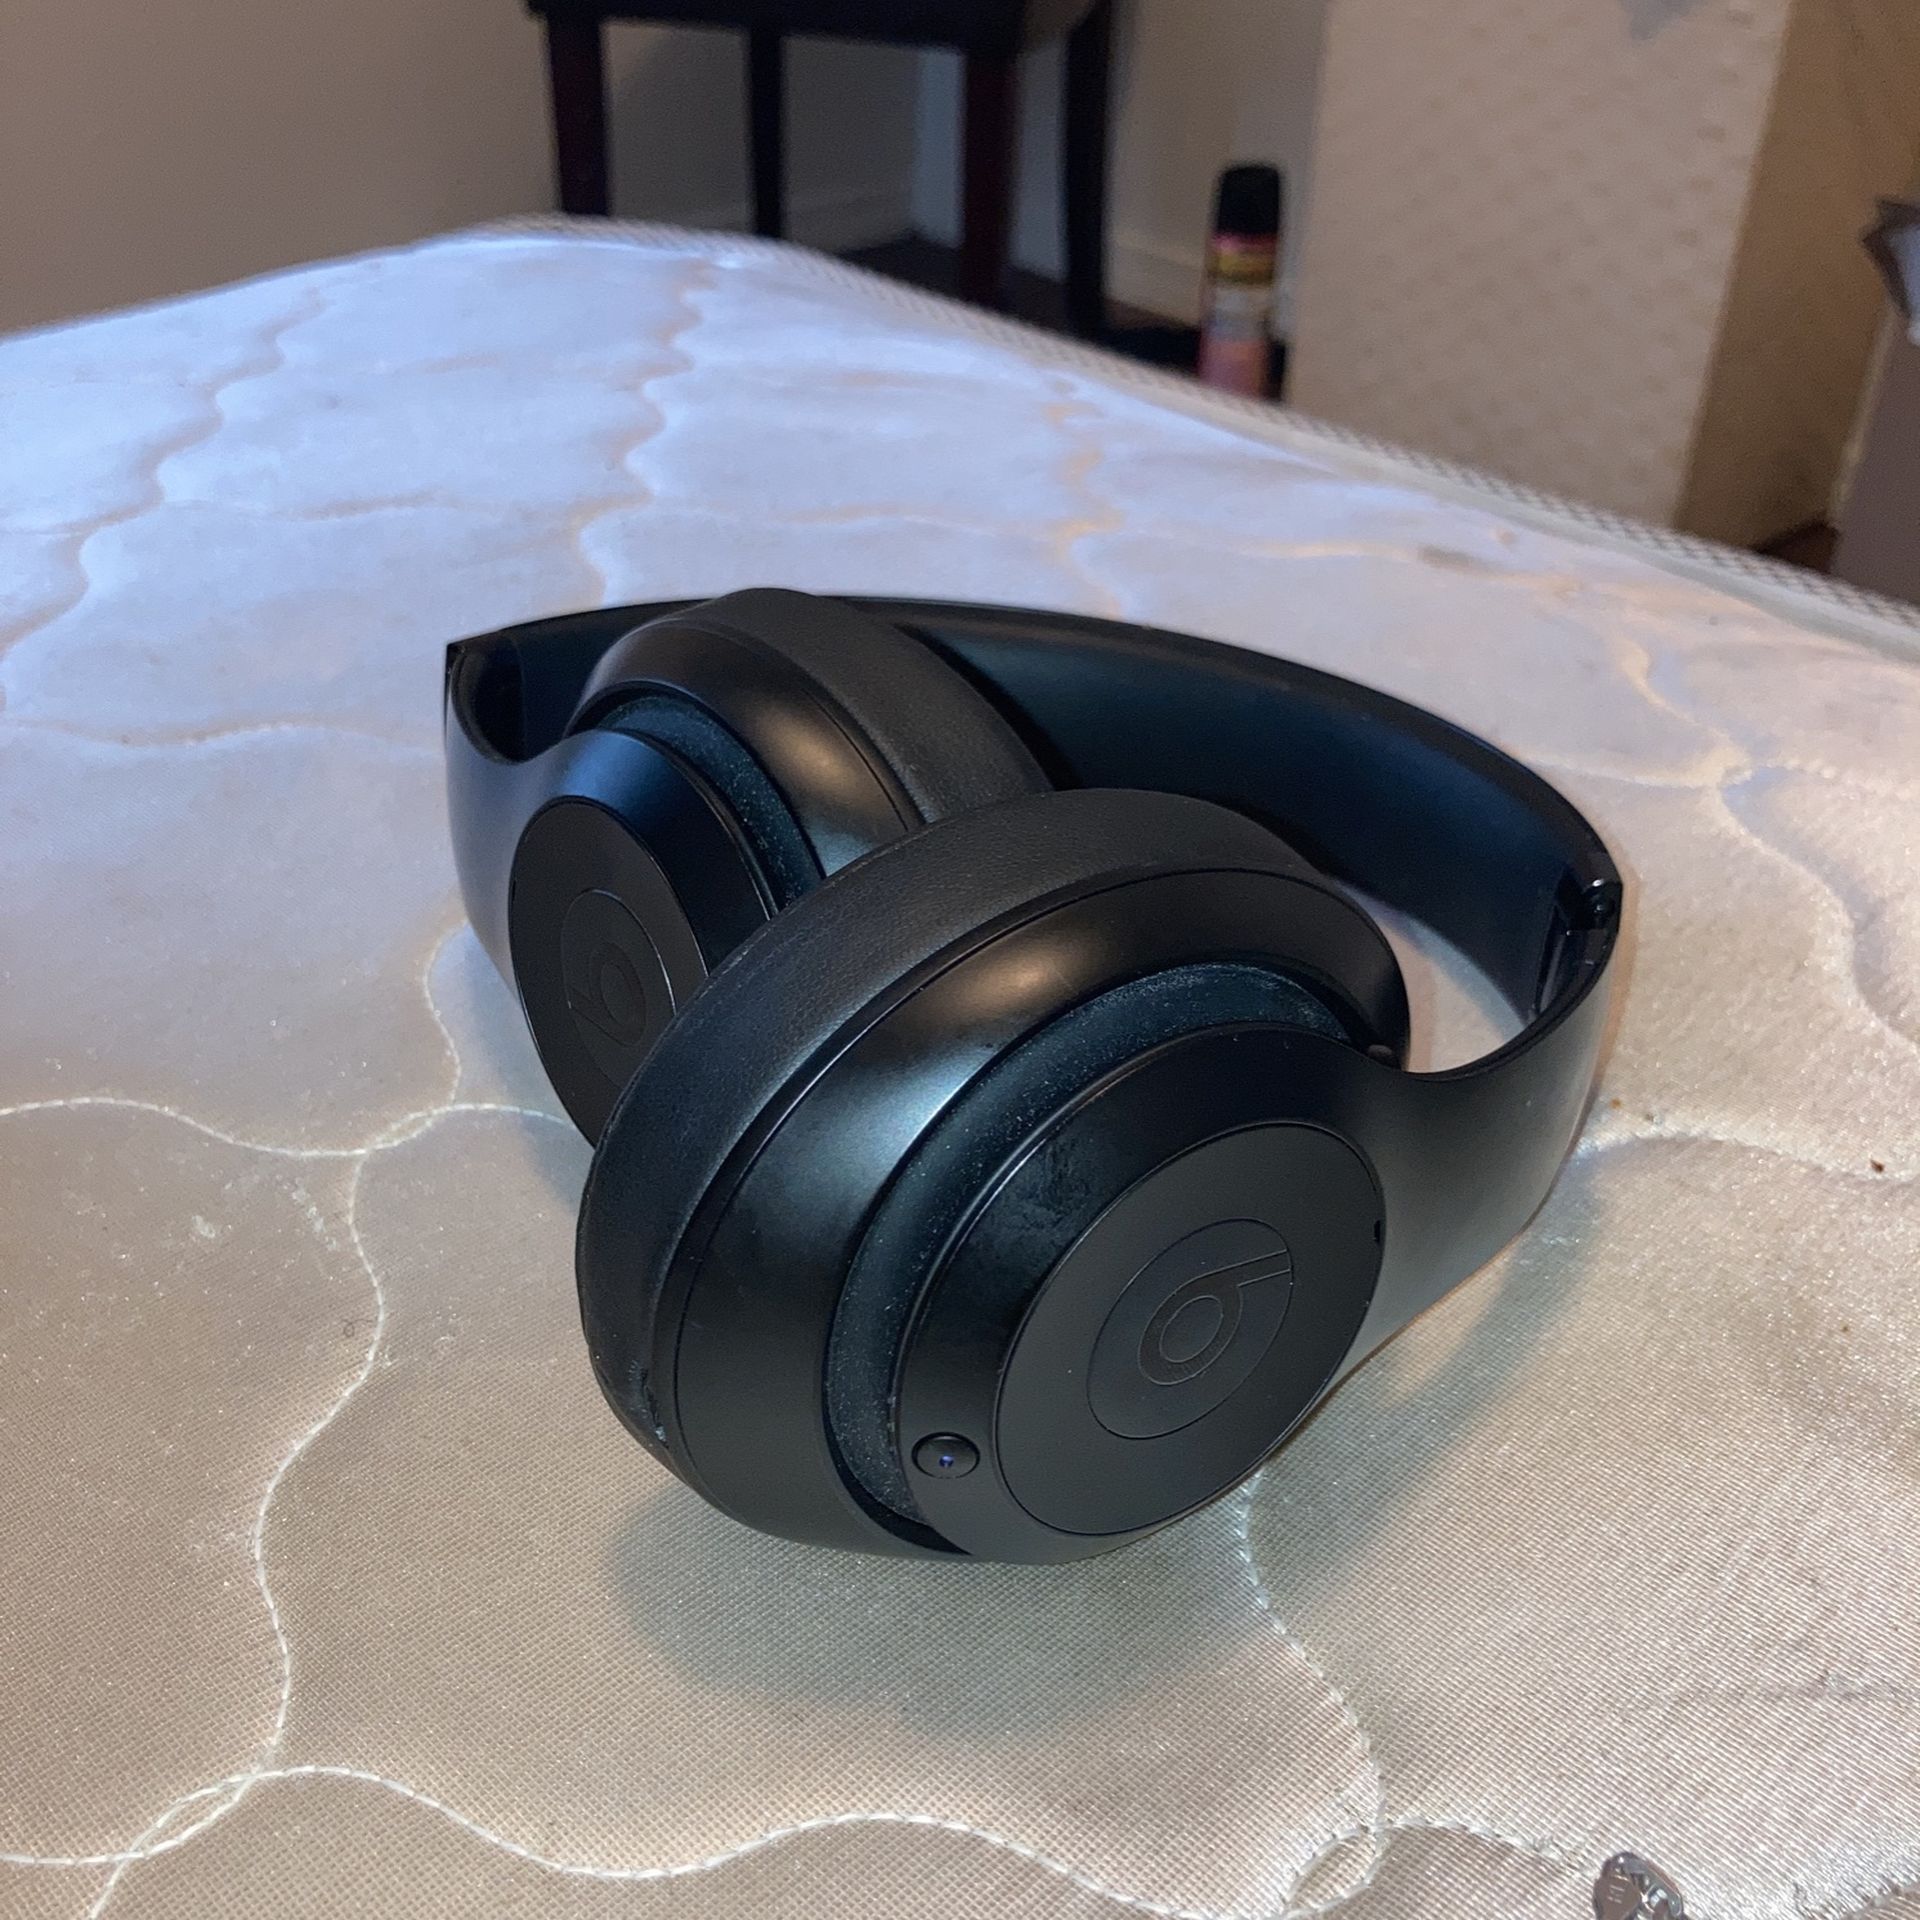 Beats By Dre Studio 3 Headphones With Noise Canceling Features With Aux Cord And Charger $150